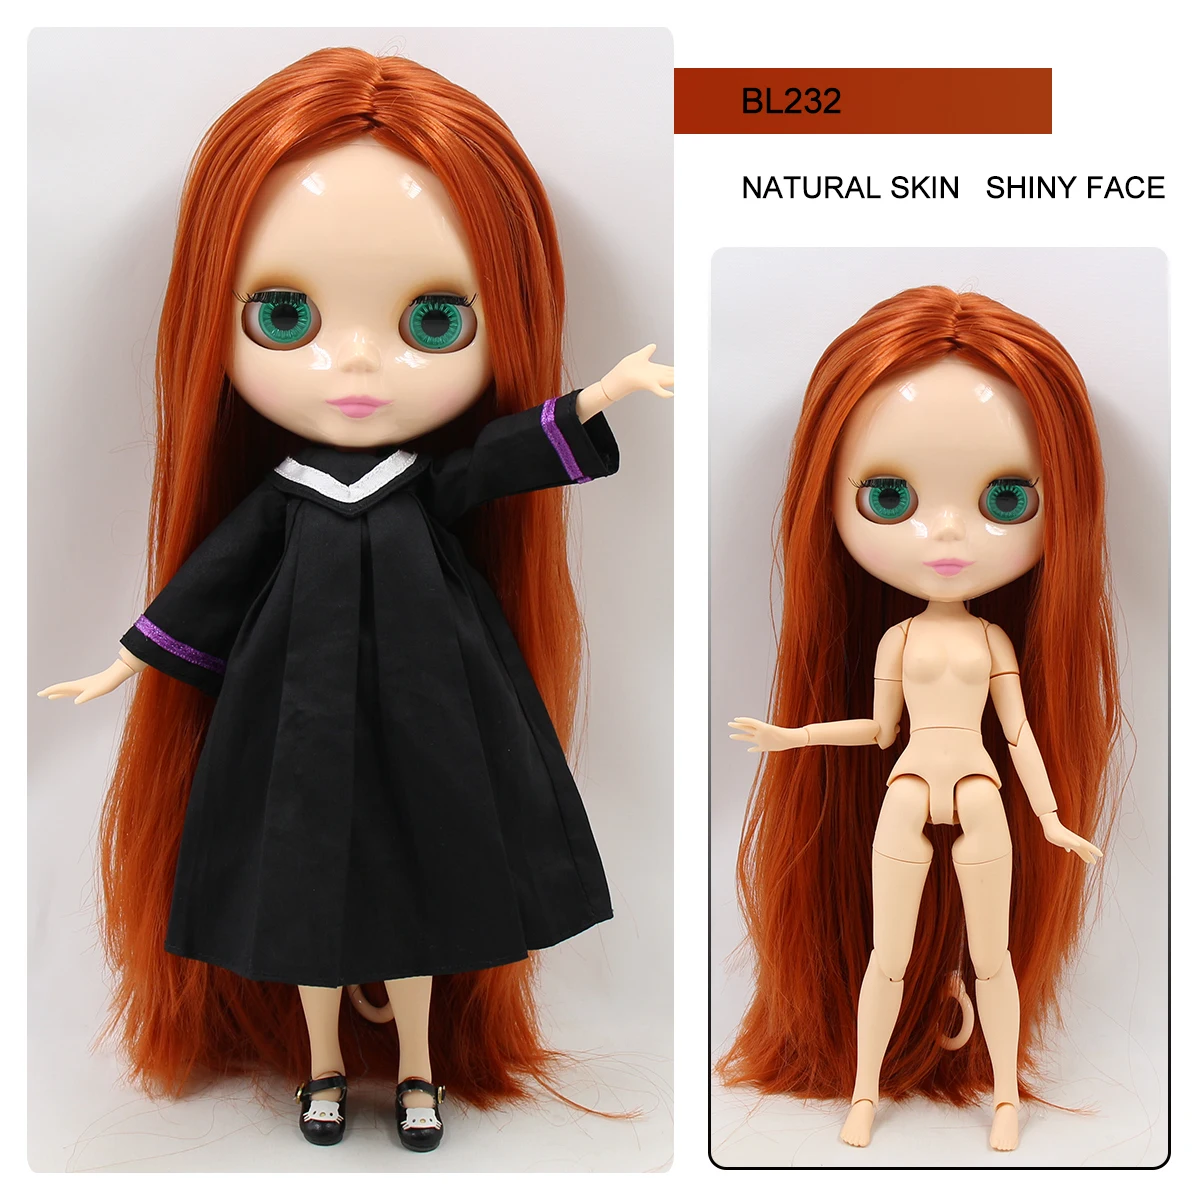 Factory Blythe Doll, Top 22 Jointed Body Options with Free Gifts 22